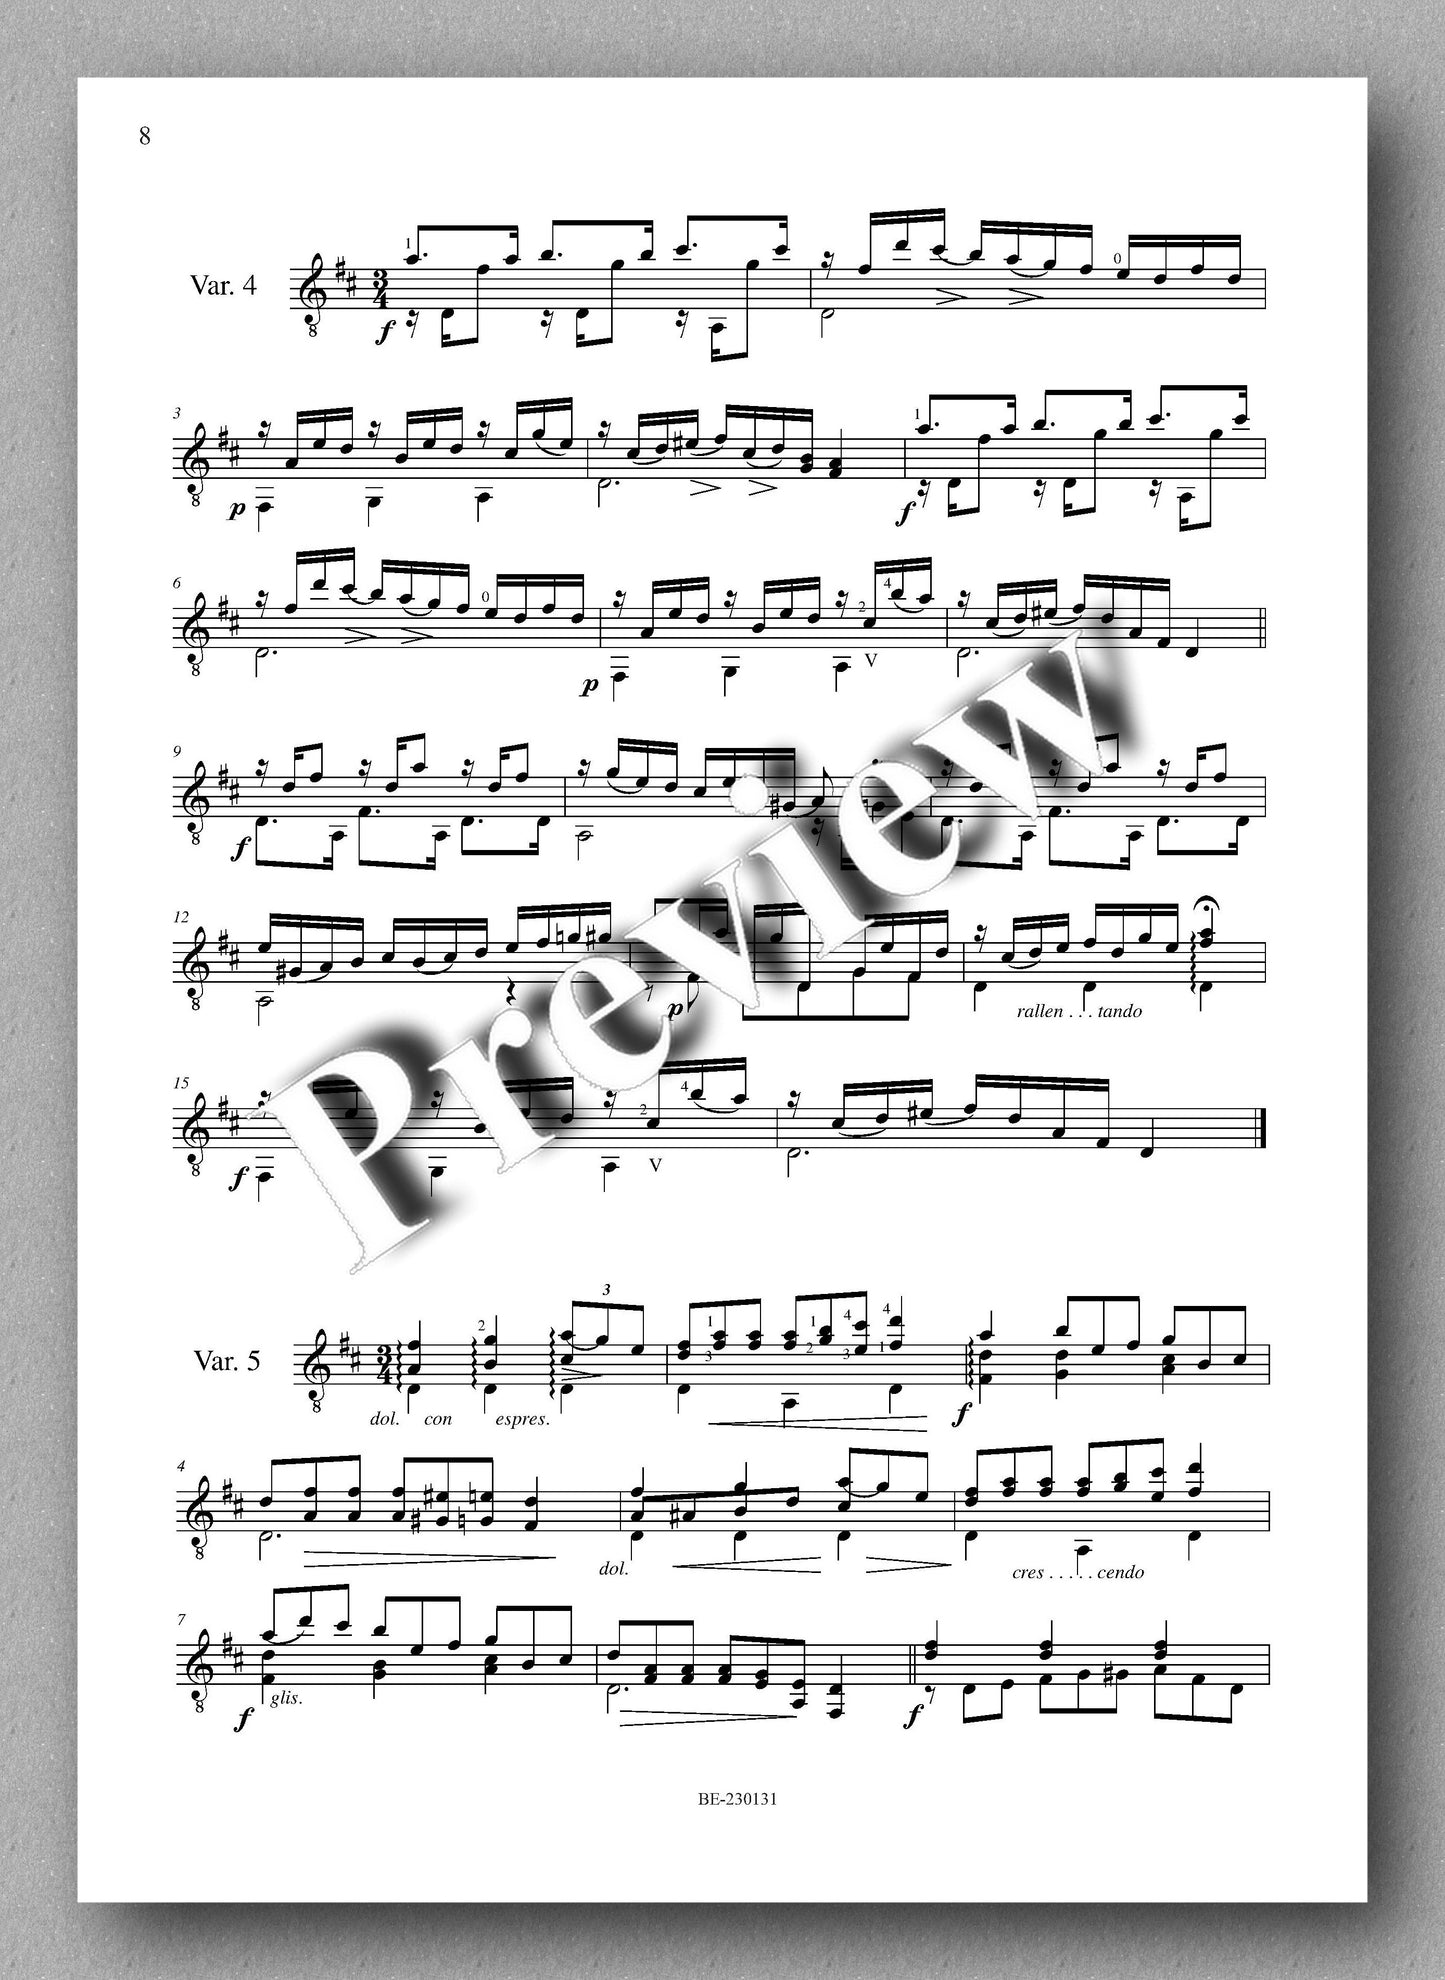 Molino, Collected Works for Guitar Solo, Vol. 43 - preview of the music score 2